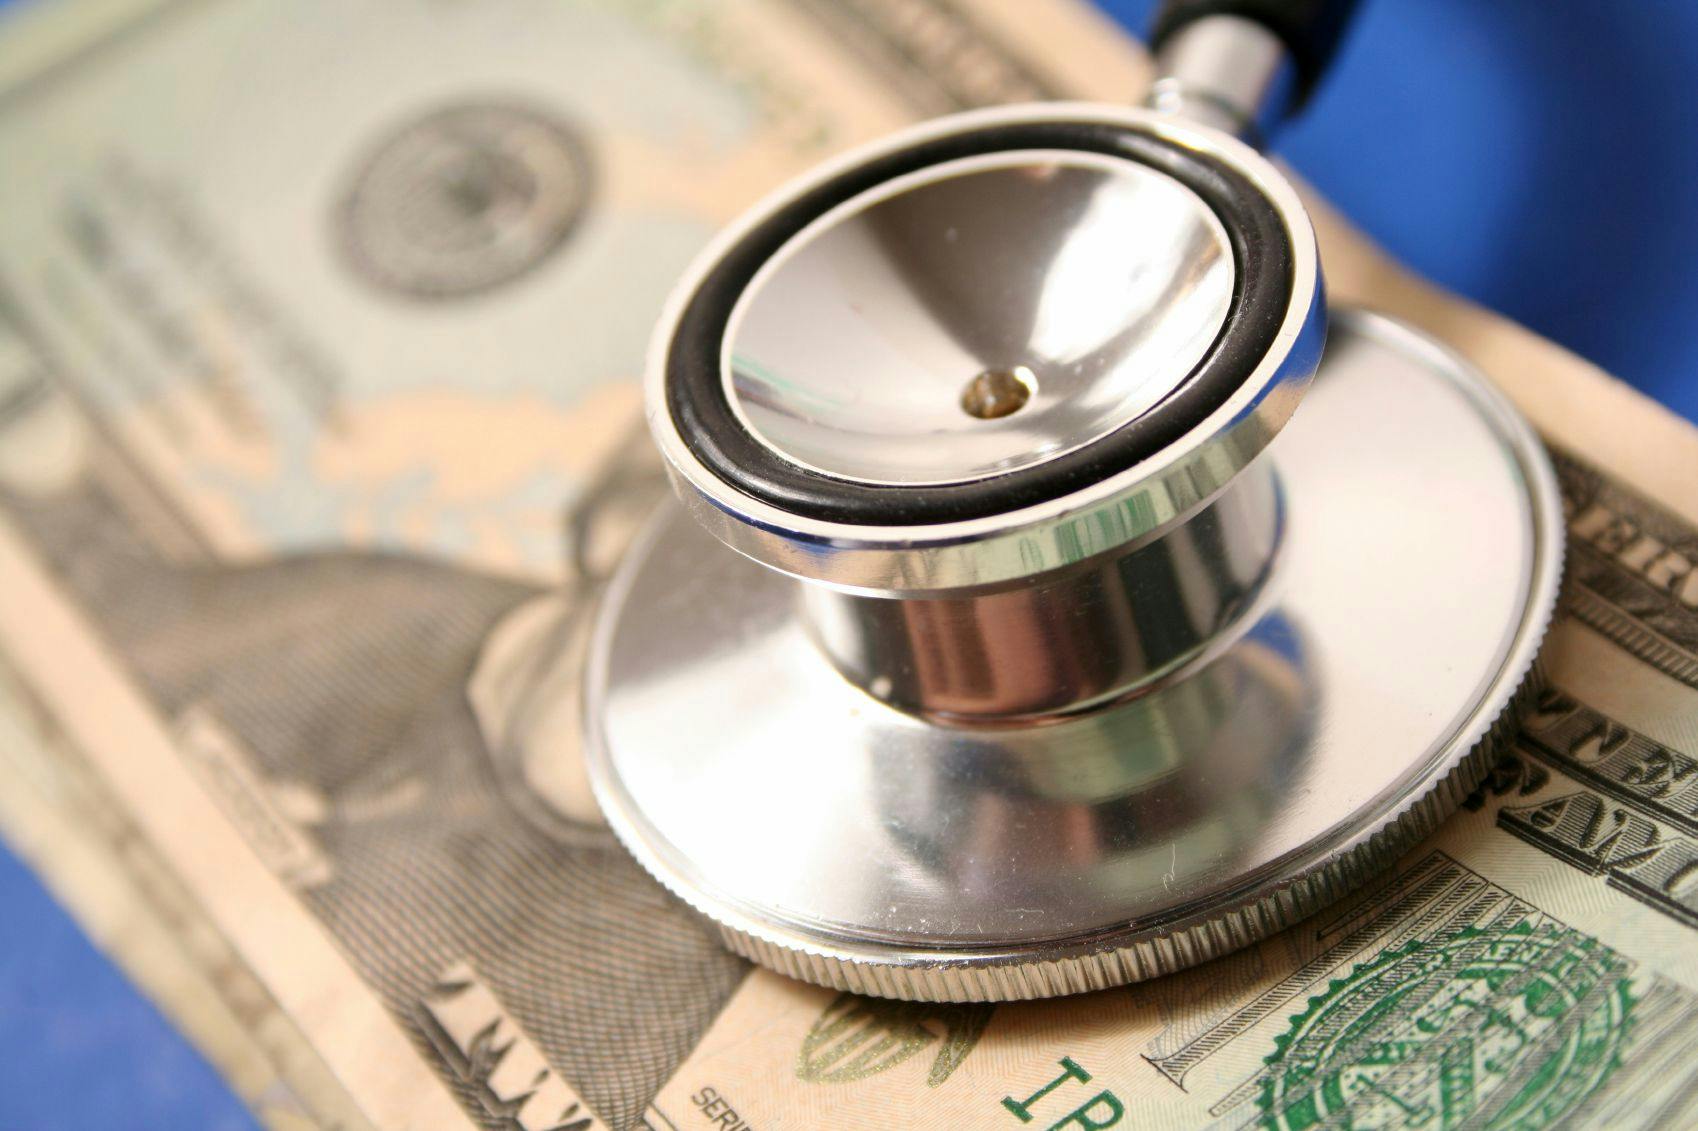 11 Groups Join ACR in Opposition of UHC’s “Disastrous” Co-Pay Policy